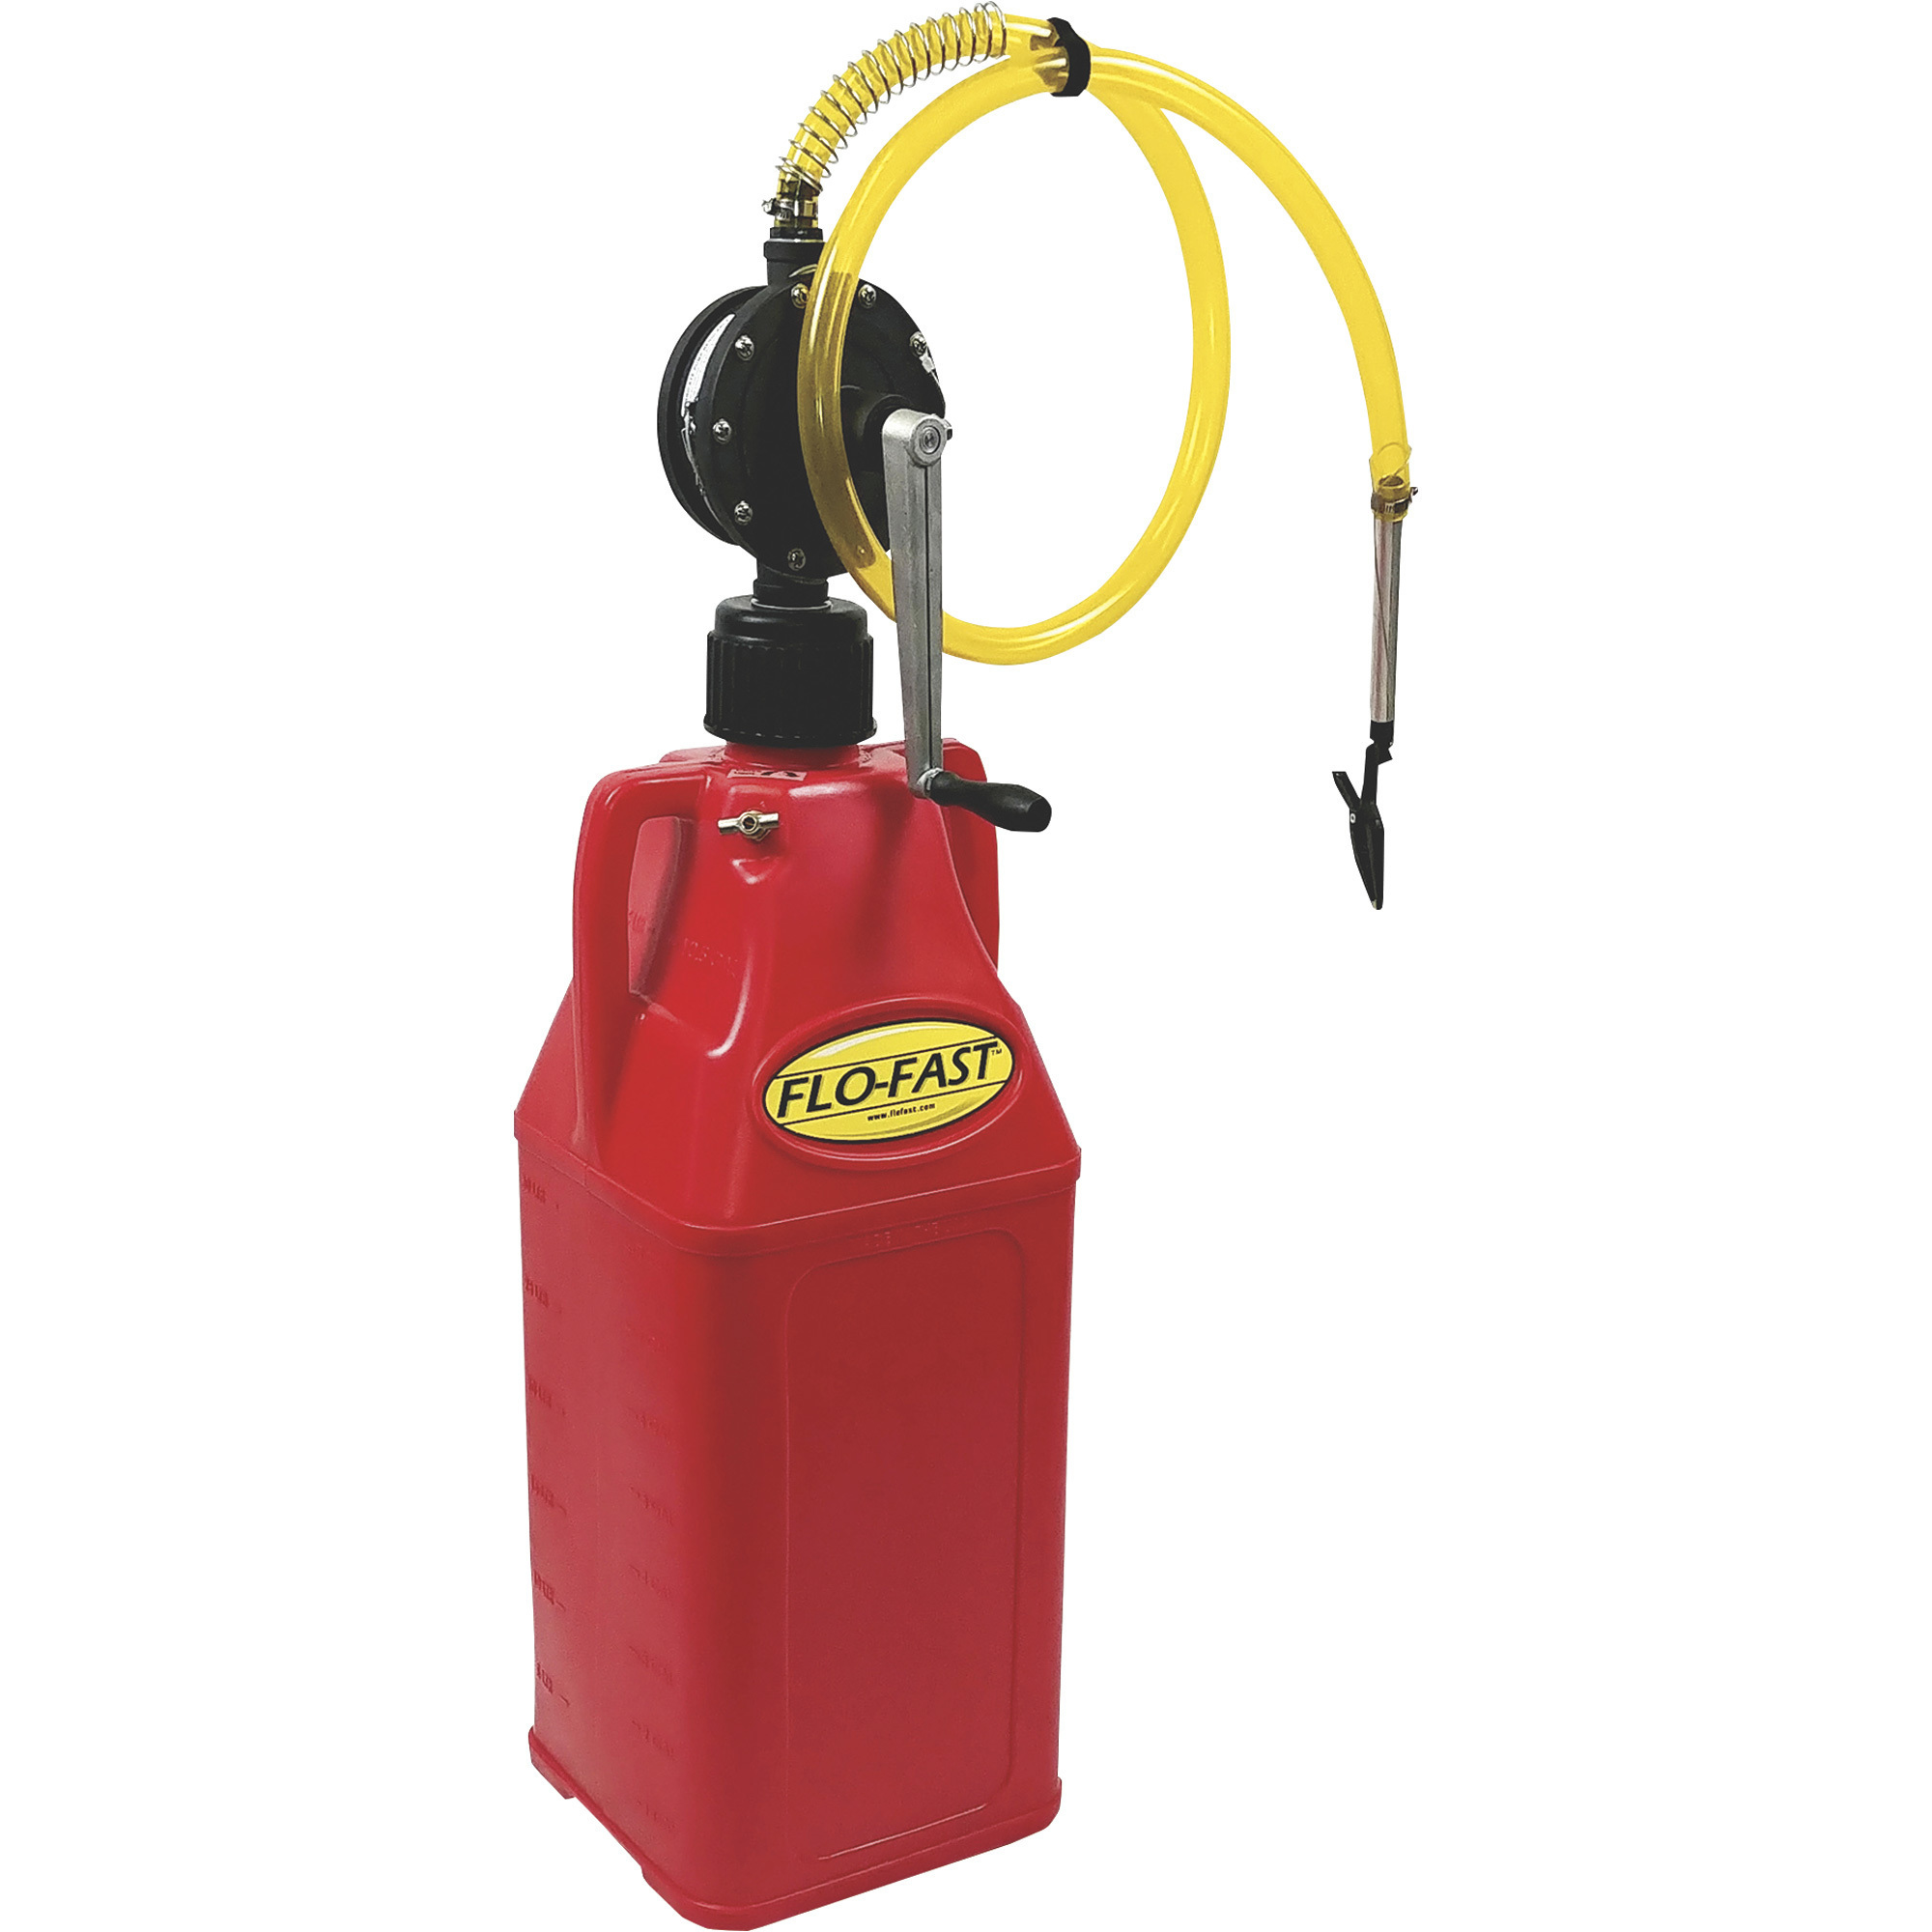 FLO-FAST Container With Pump, 10.5-Gallon, Red, For Gasoline, Model# 30050-R